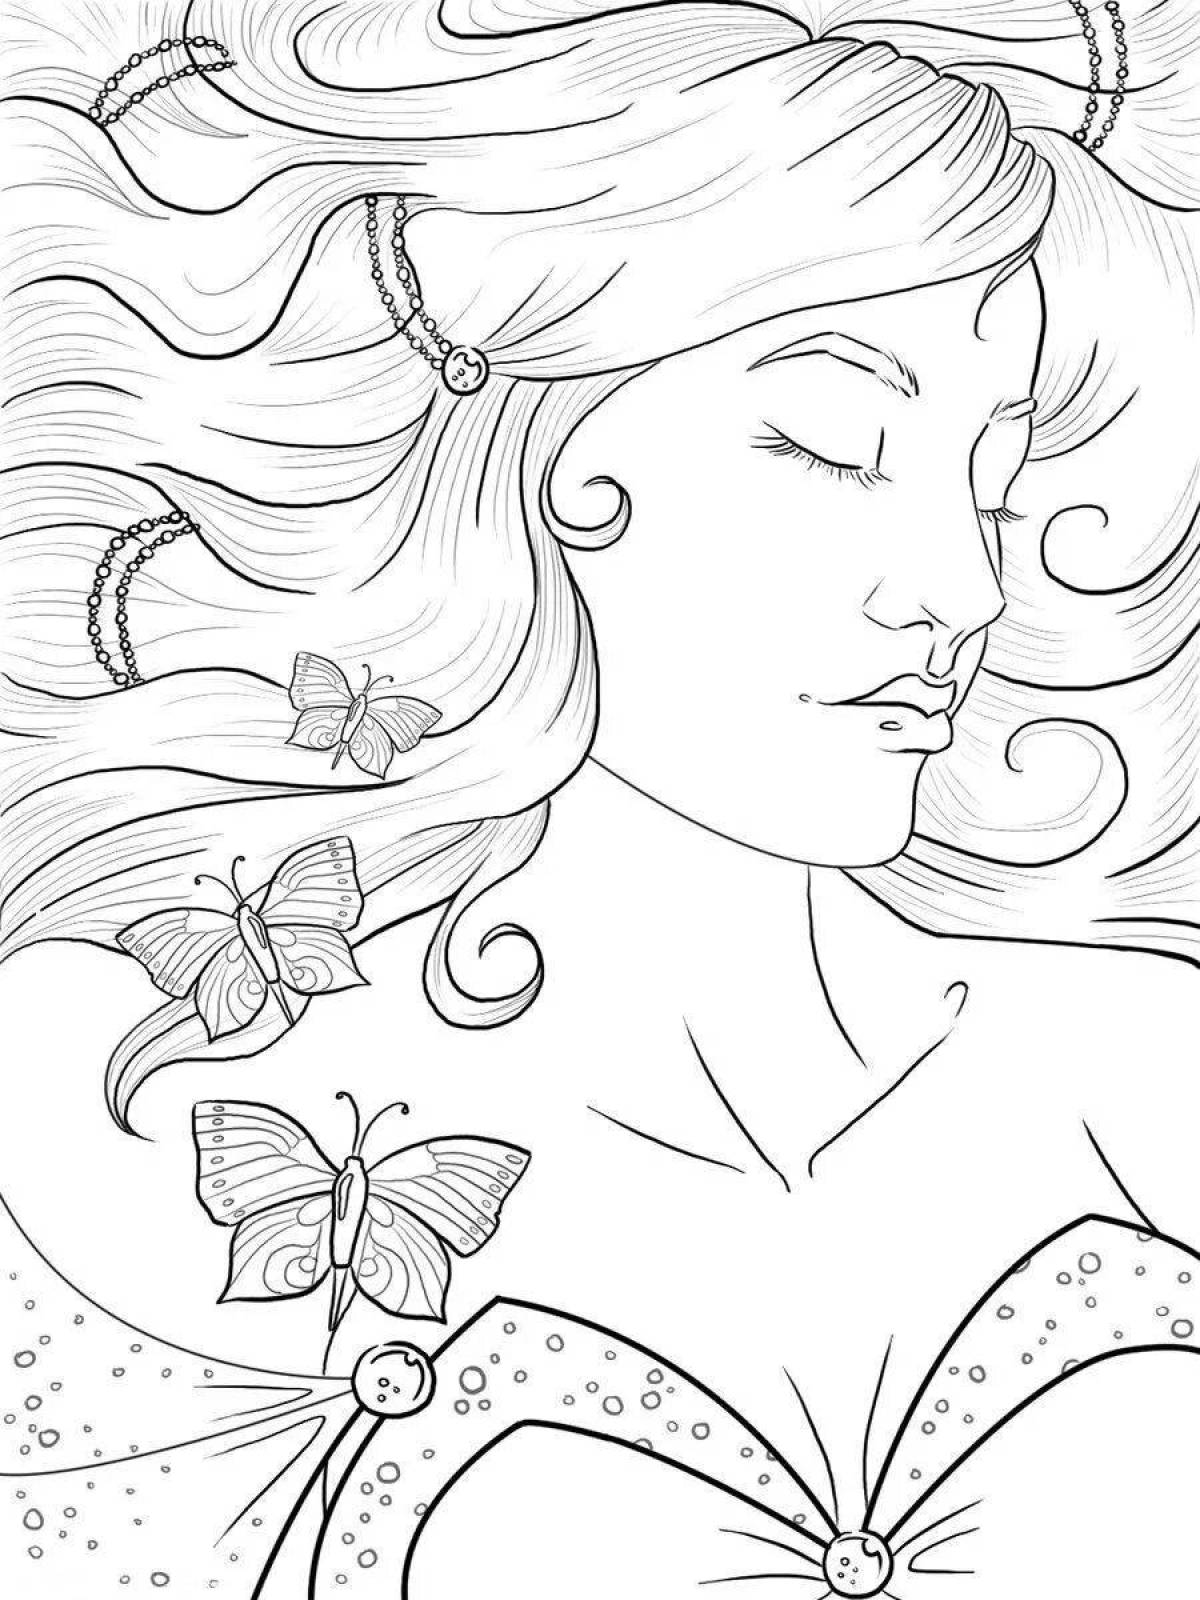 Amazing beauty coloring book